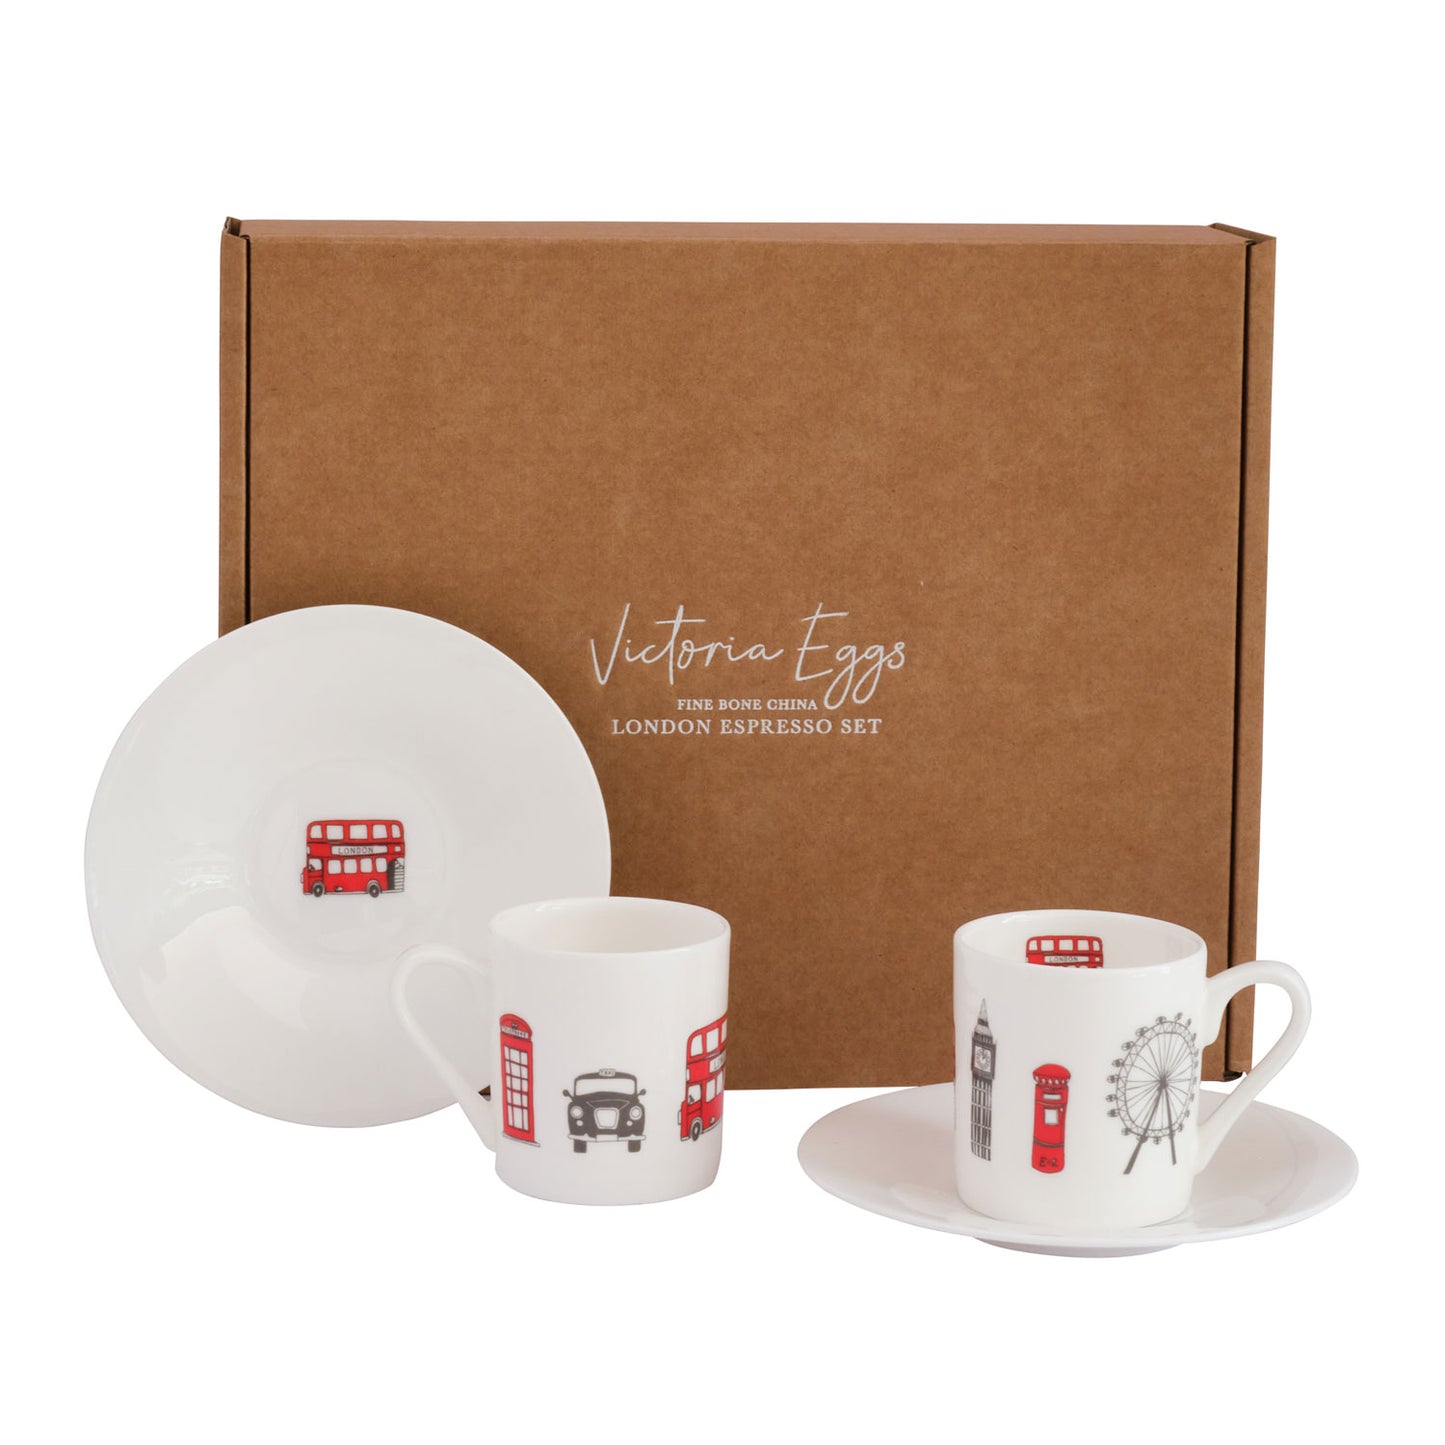 London Skyline - Boxed Set of 2 Espresso Cups and Saucers GIFT SET